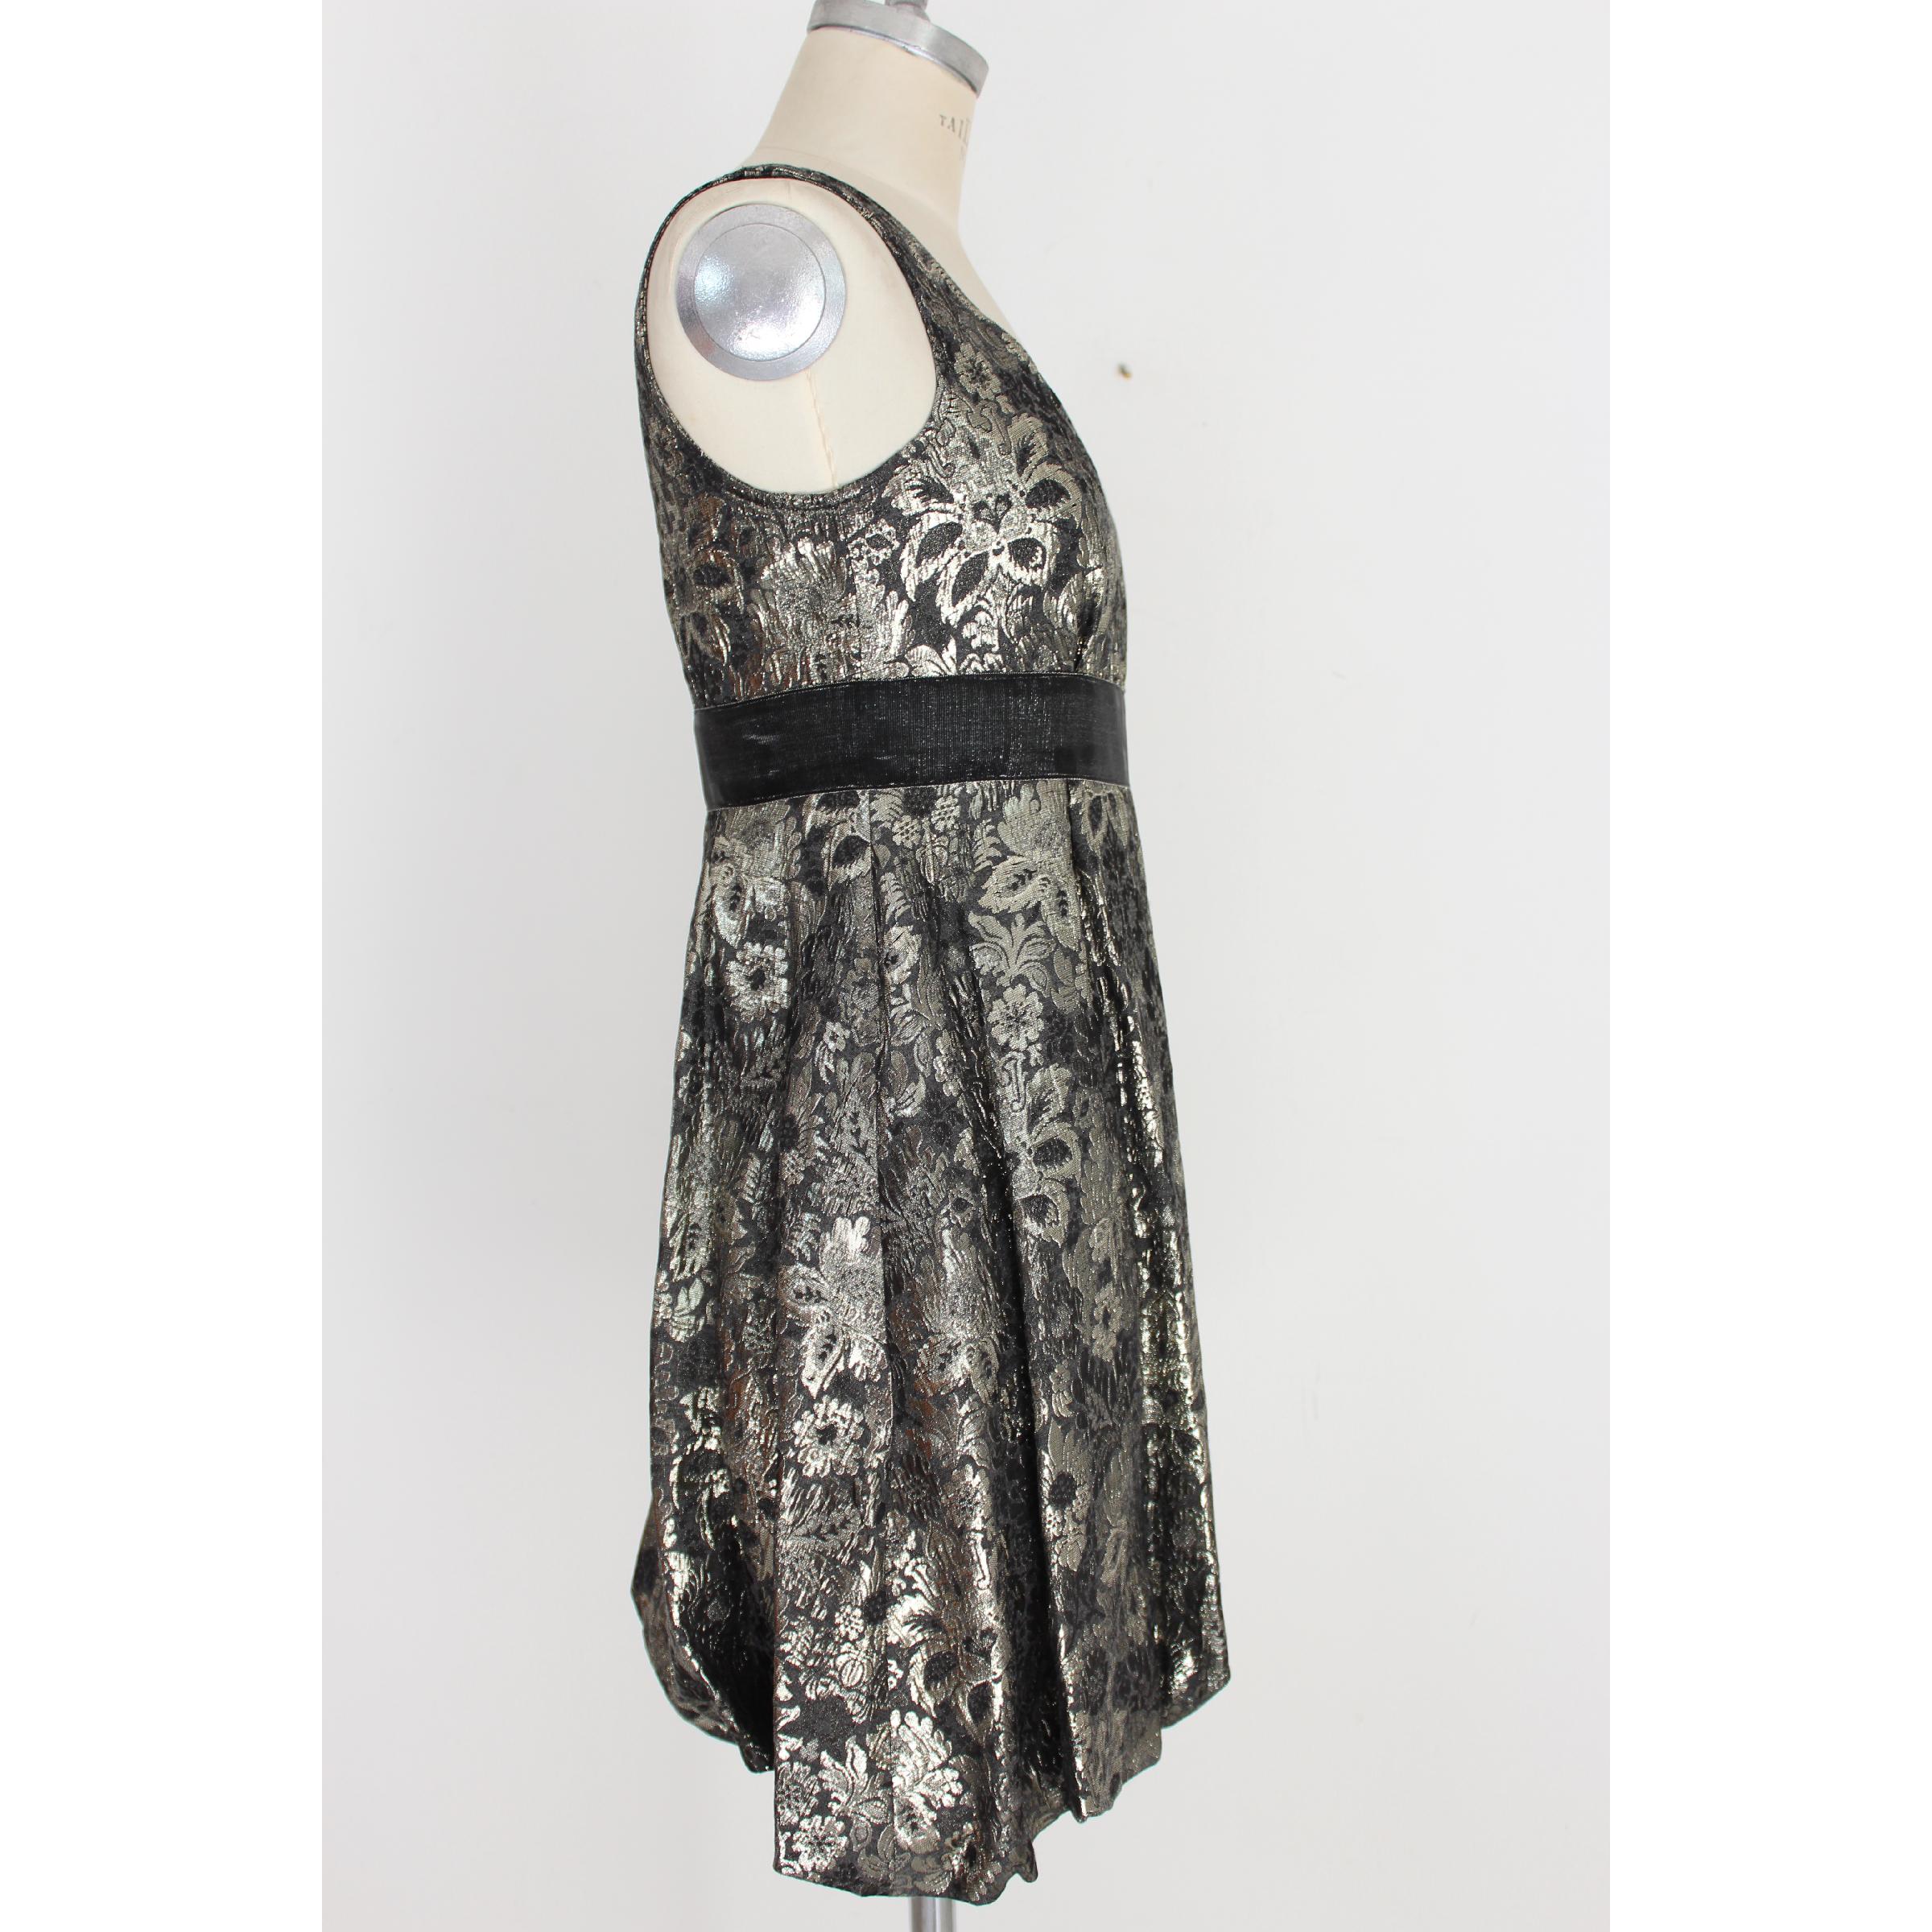 Moschino Black Lame Floral Evening Sheath Dress 1990s In Excellent Condition For Sale In Brindisi, Bt